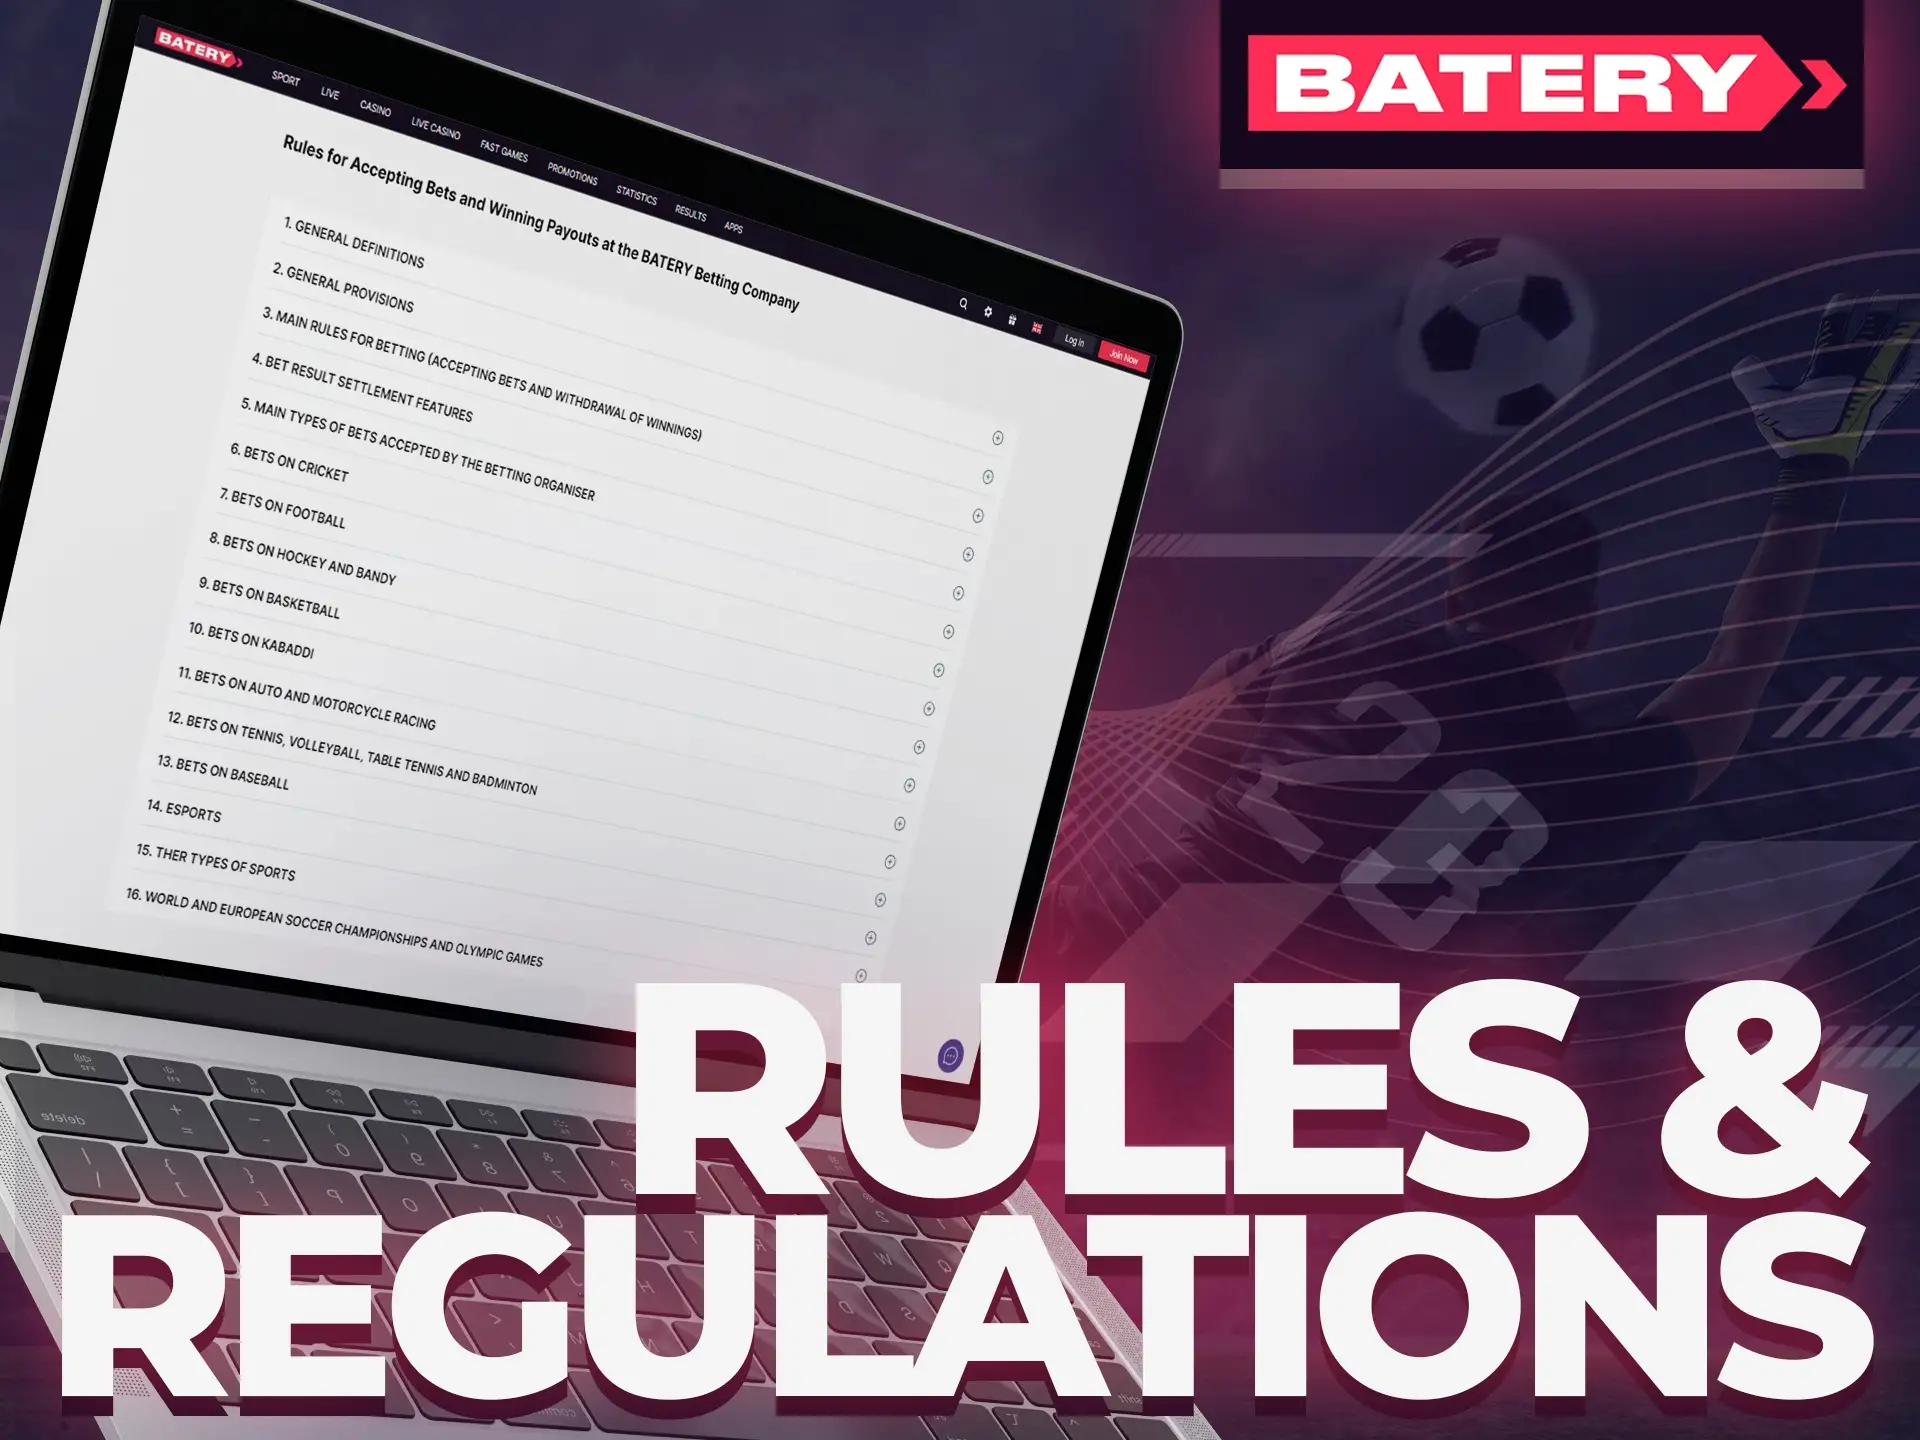 Follow Batery rules for better betting experience.